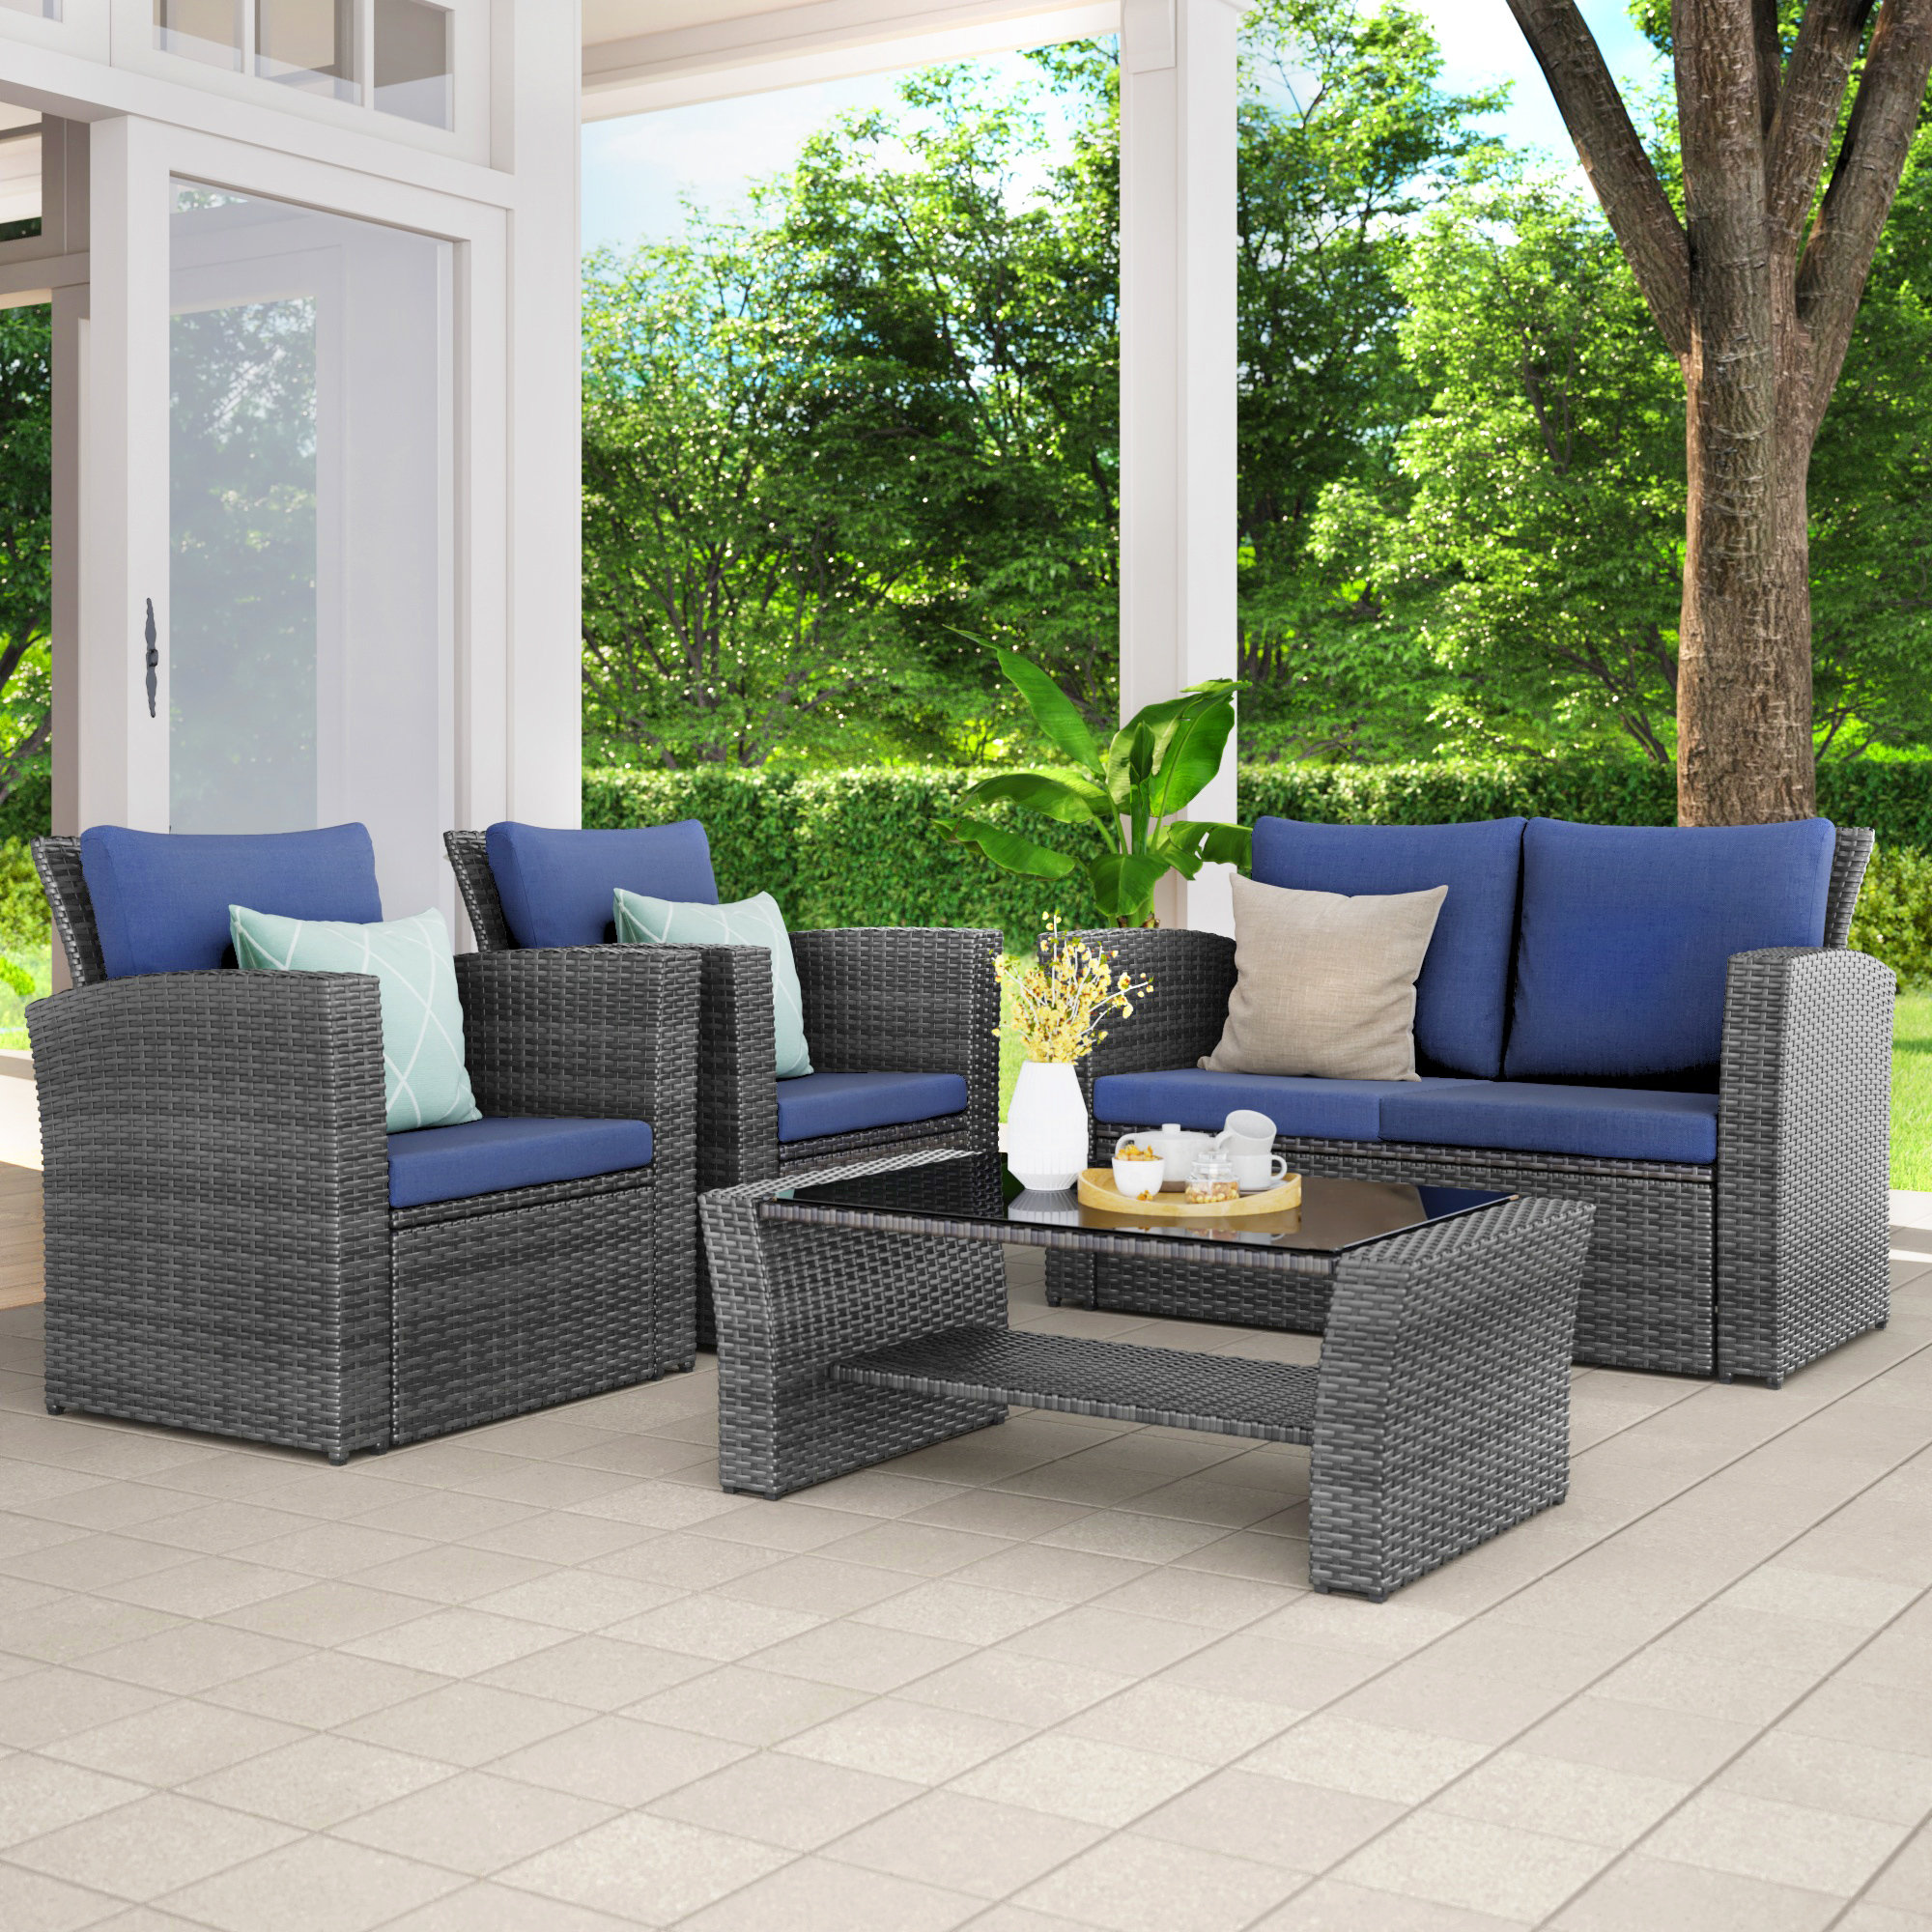 Ebern Designs Netherside 4 Piece Rattan Sofa Seating Group with